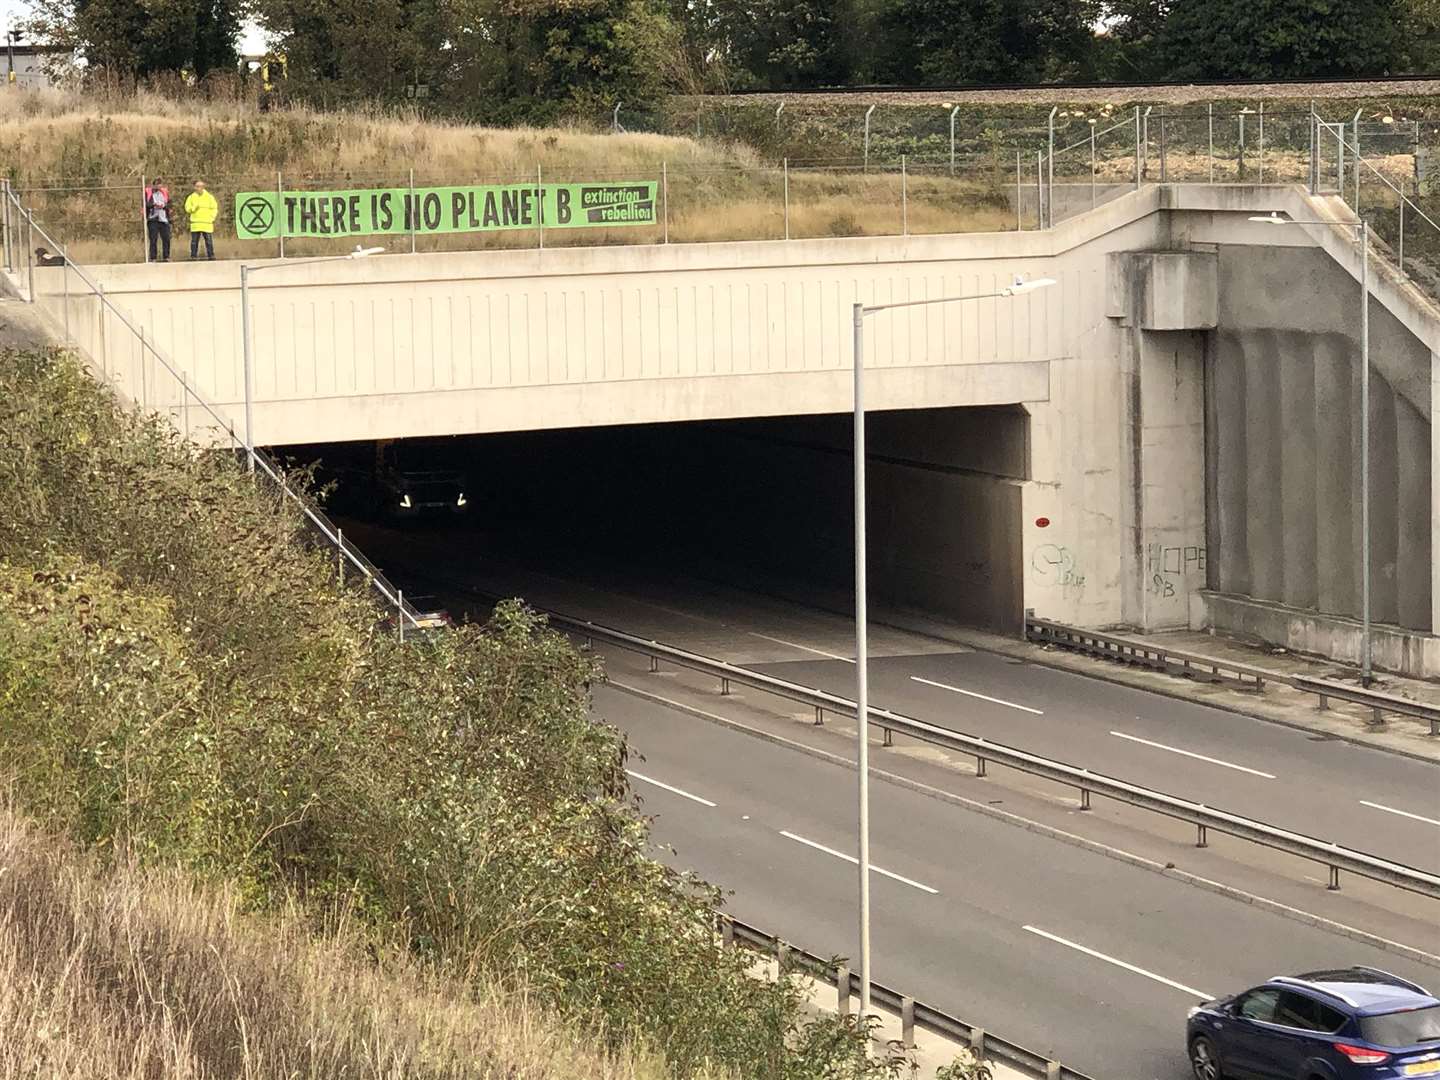 XR campaigners decorated a bridge with banners in opposition to the reopening of Manston Airport